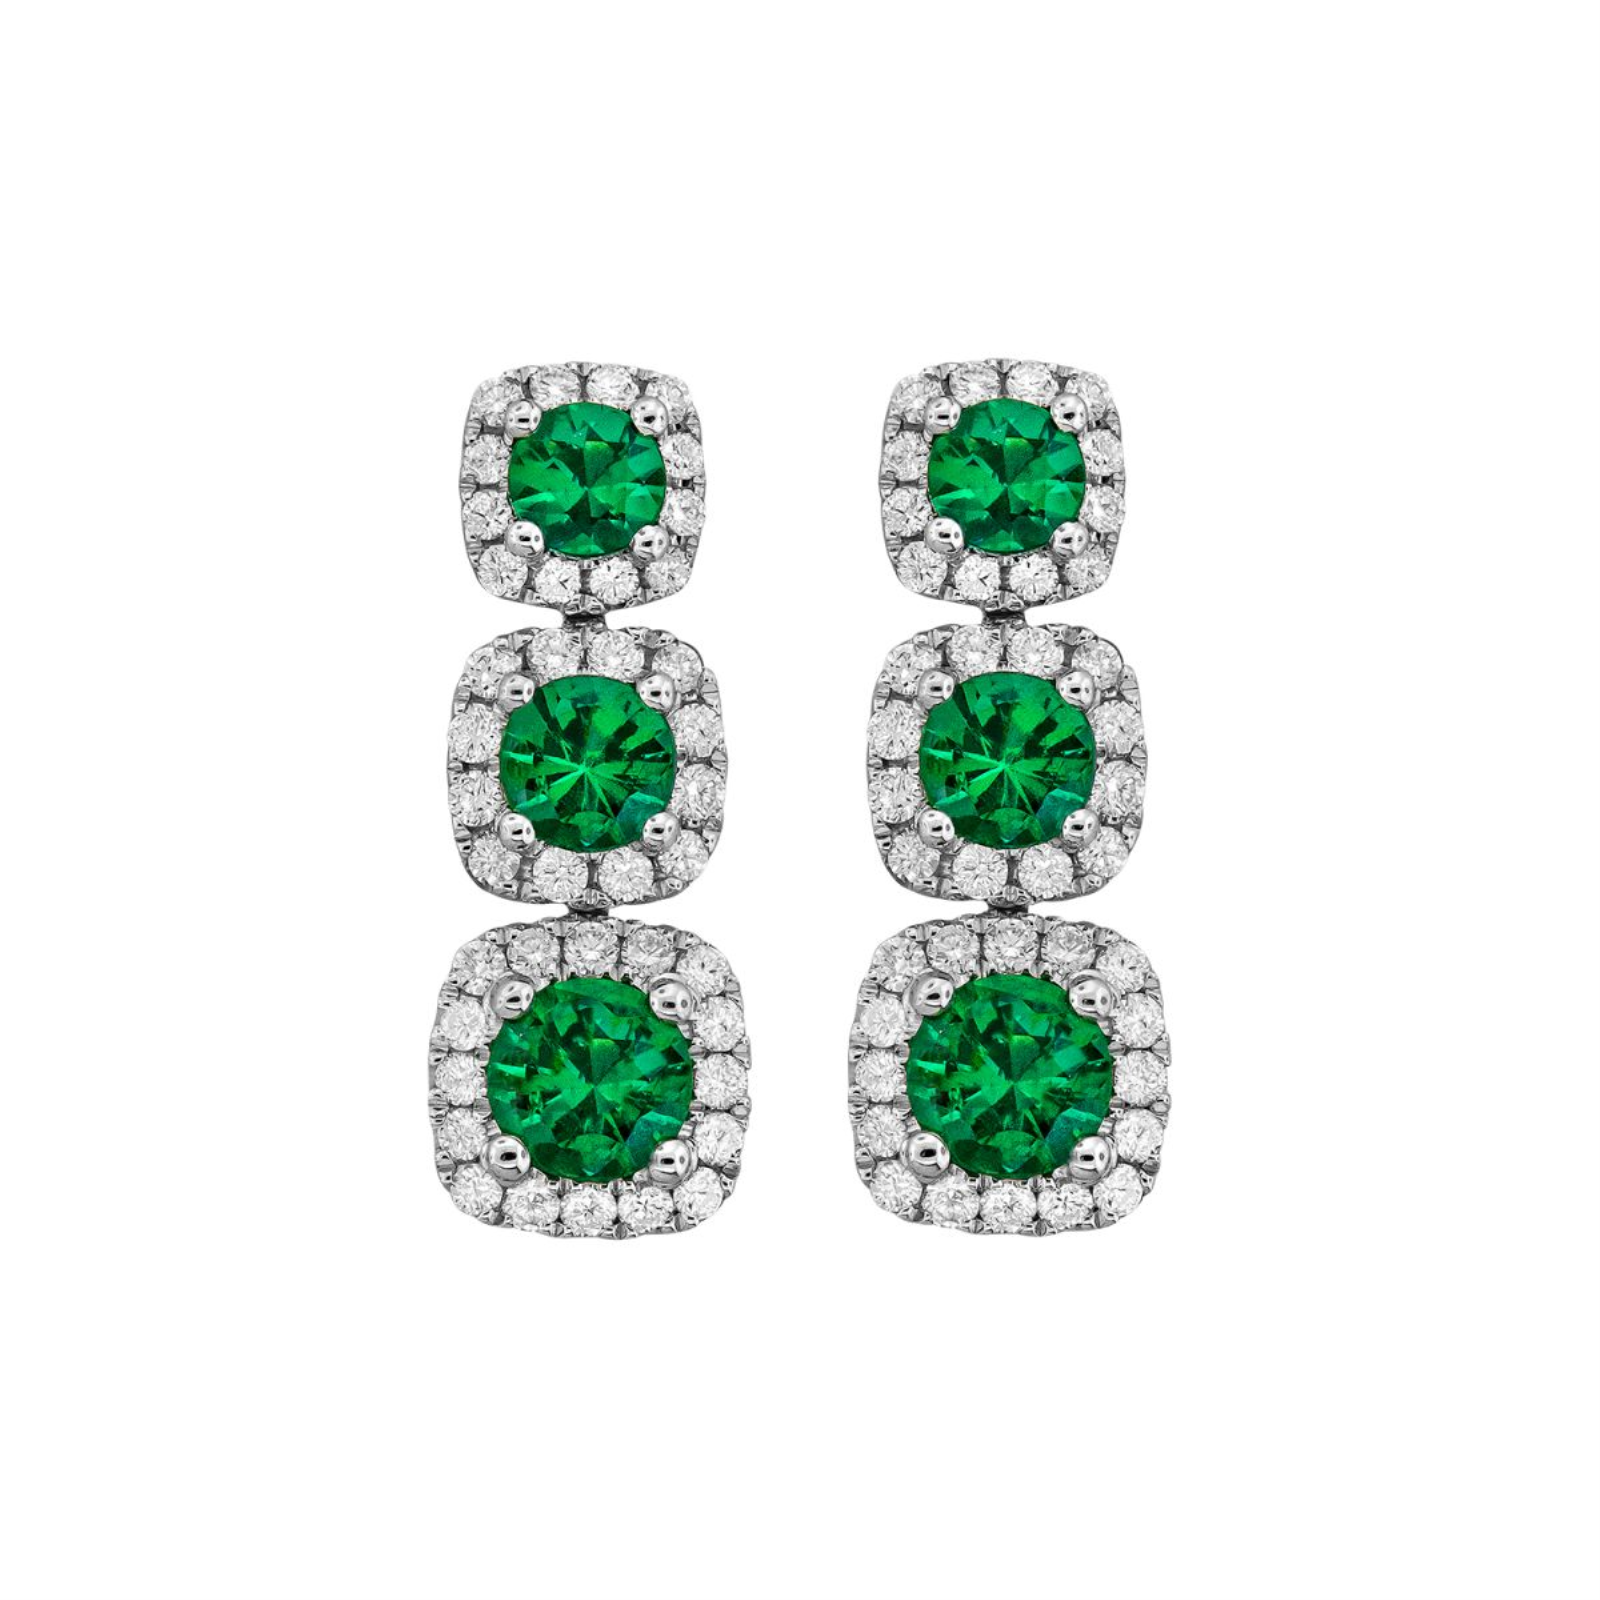 White Gold Emerald and Diamond Halo Drop Earrings